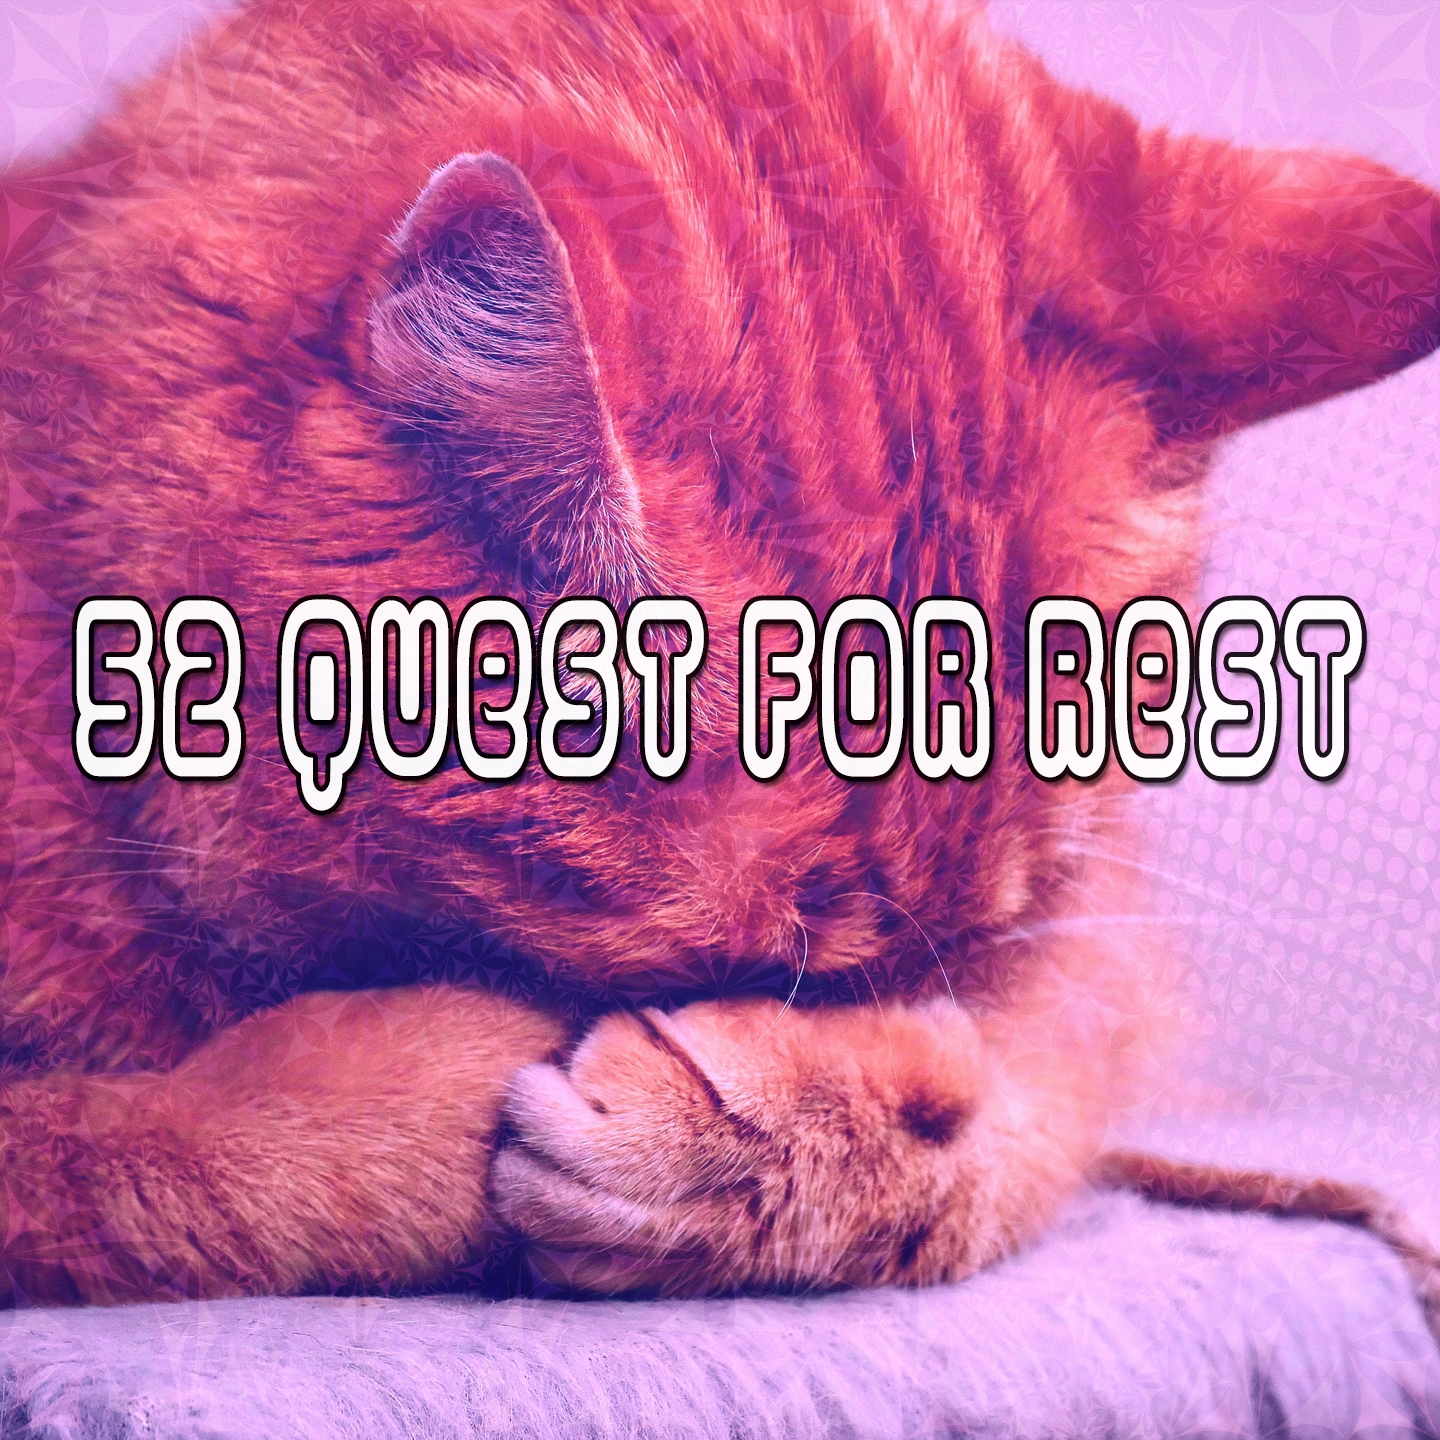 52 Quest For Rest